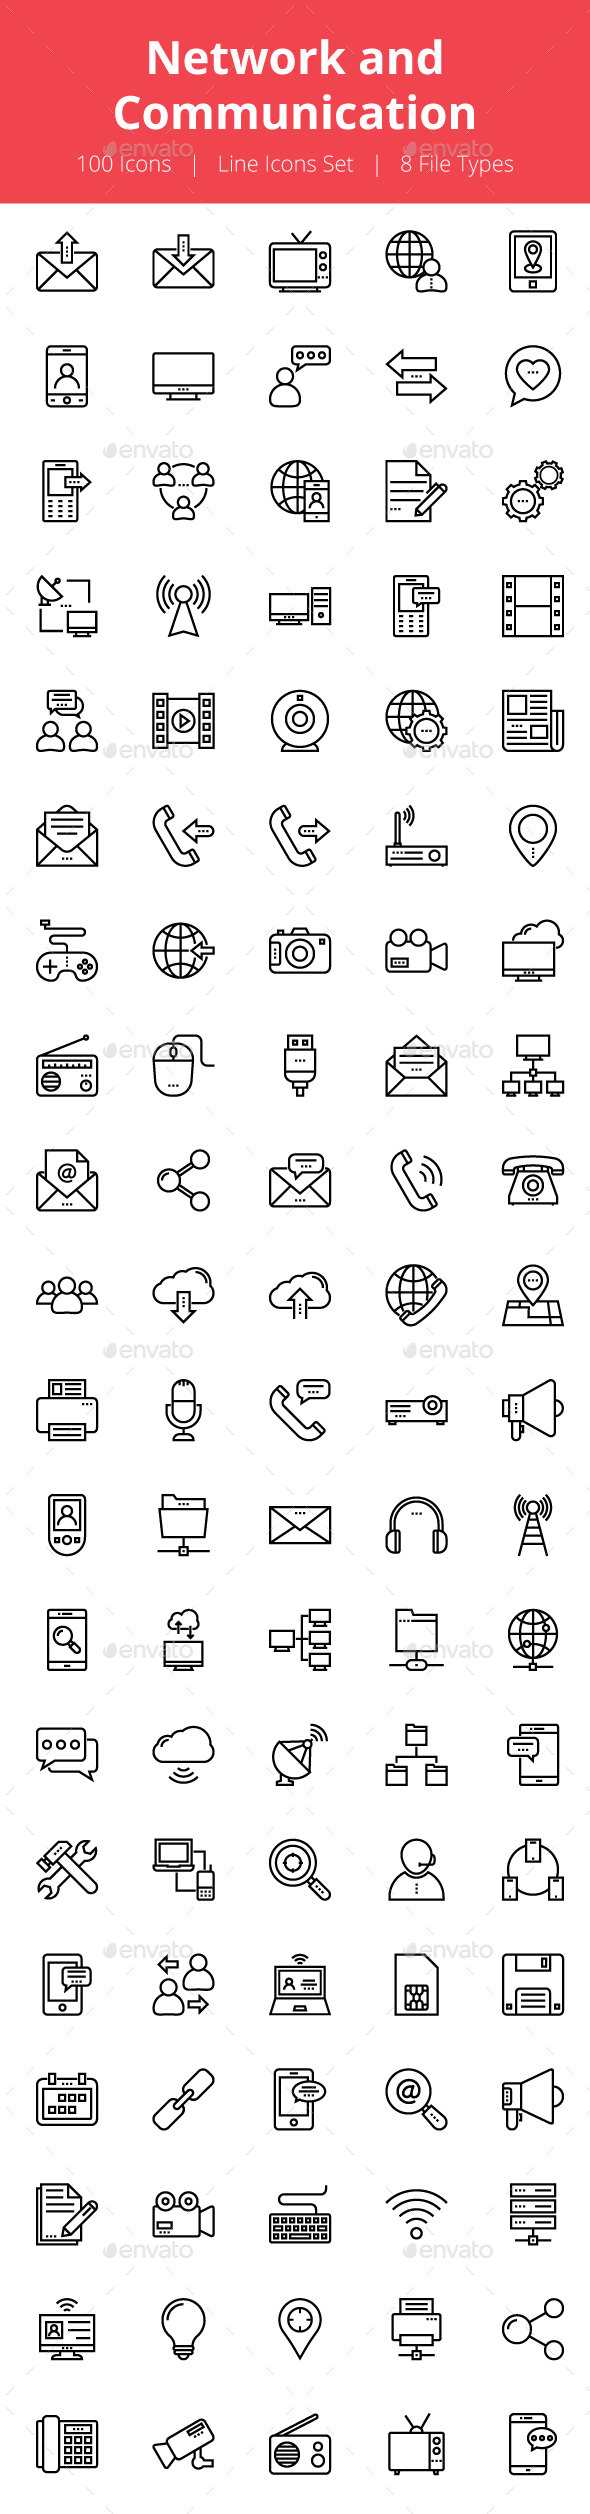 100 Network and Communication Icons